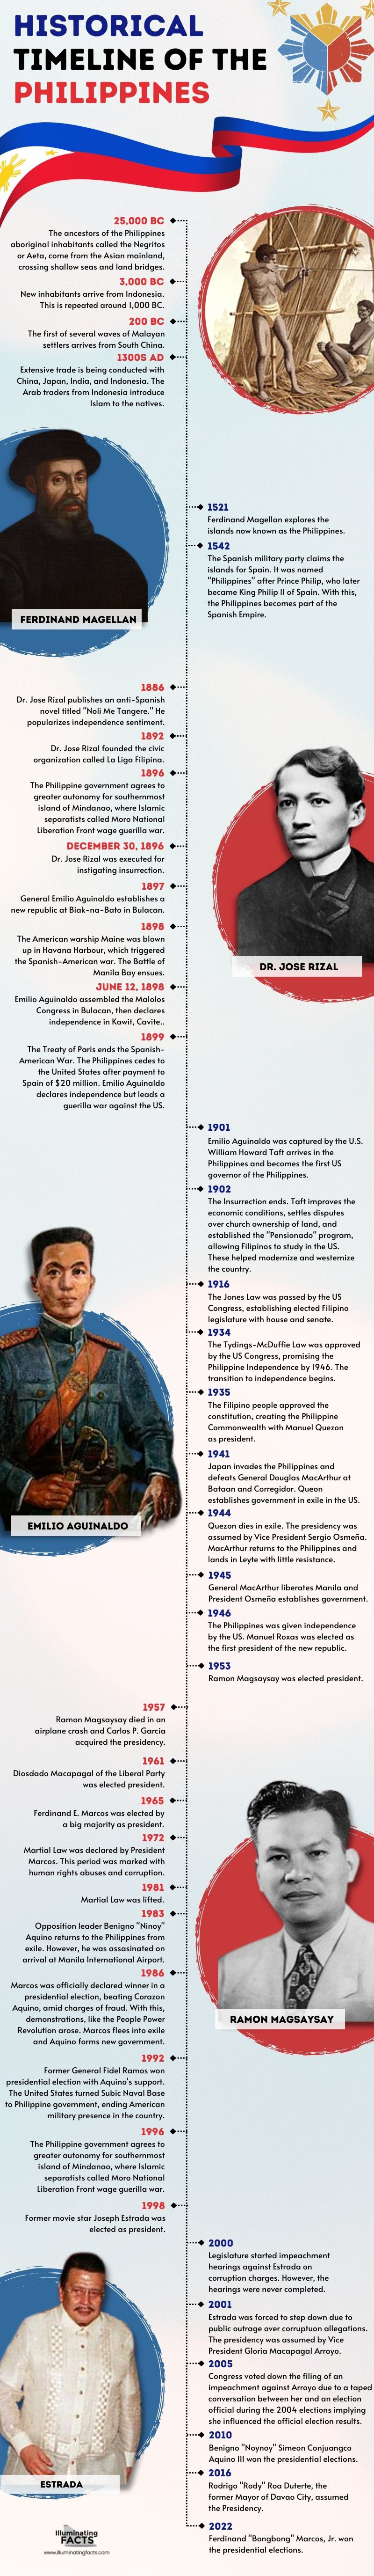 HISTORICAL TIMELINE OF THE PHILIPPINES